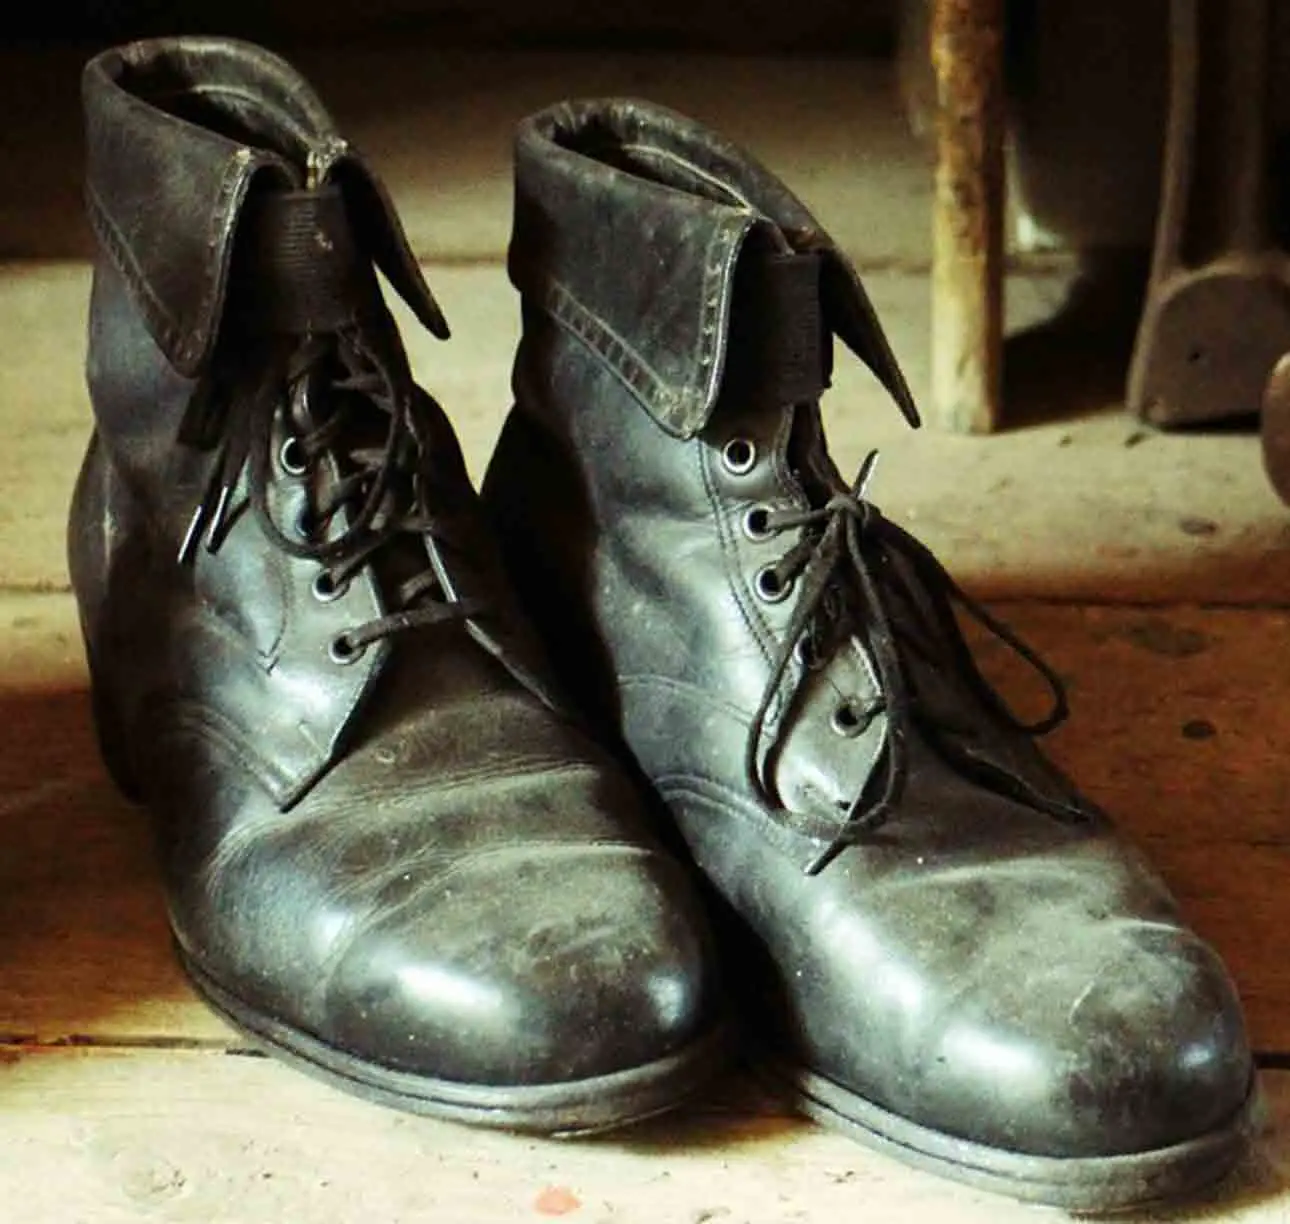 How to Remove Mold From Shoes and Why Not to Ignore It